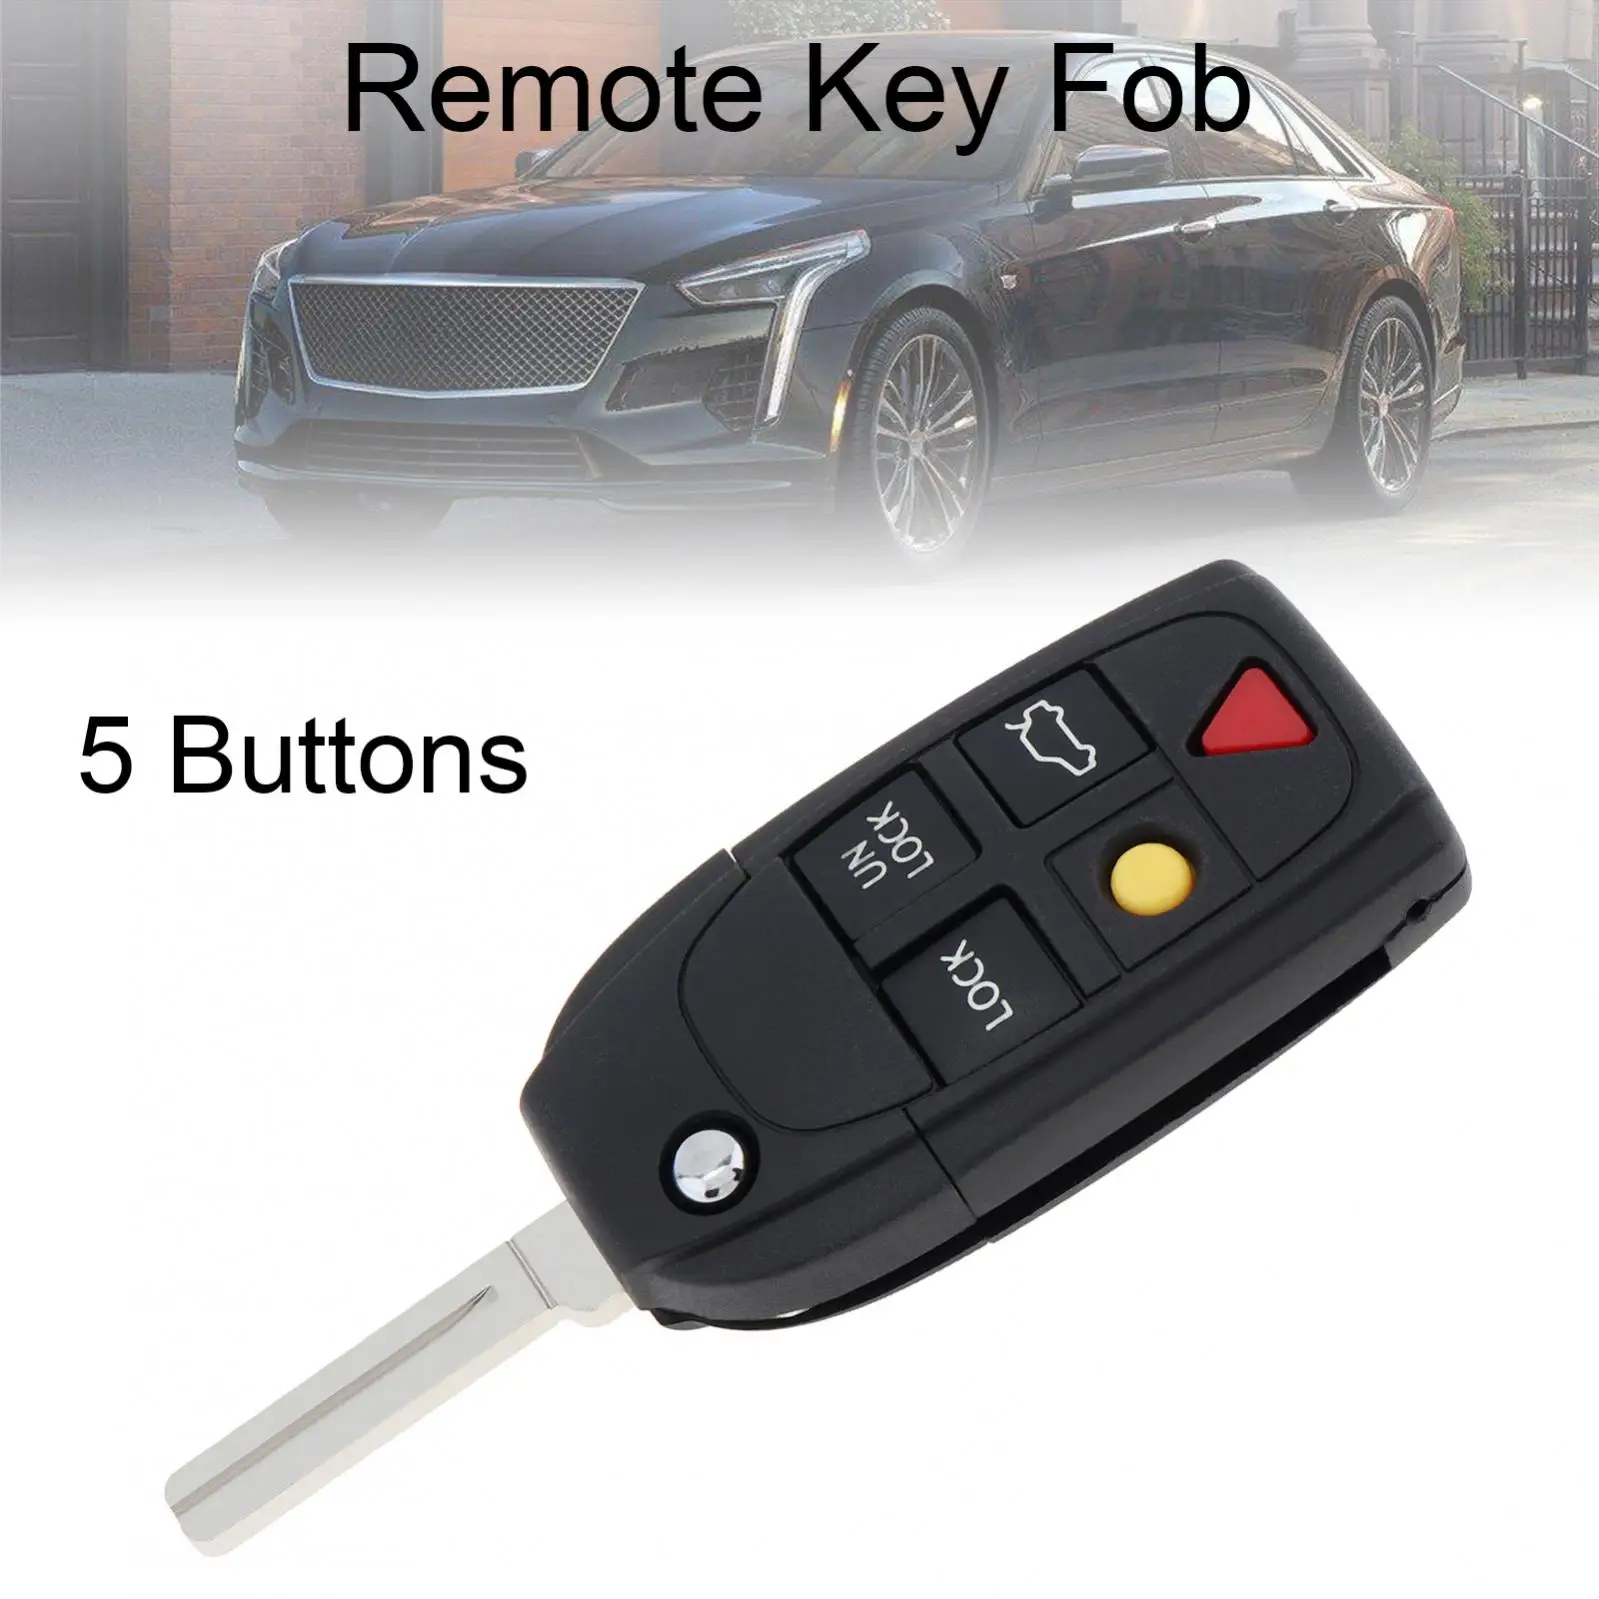 5 Buttons Car Key Fob Case Shell Replacement Flip Folding Remote Cover Car Key Accessories Fit for VOLVO S60 S80 V70 XC90 5 buttons flip remote key case fob replacement fit for volvo s60 2000 2009 s80 1999 2006 v70 2000 2007 xc90 2002 2013 car key